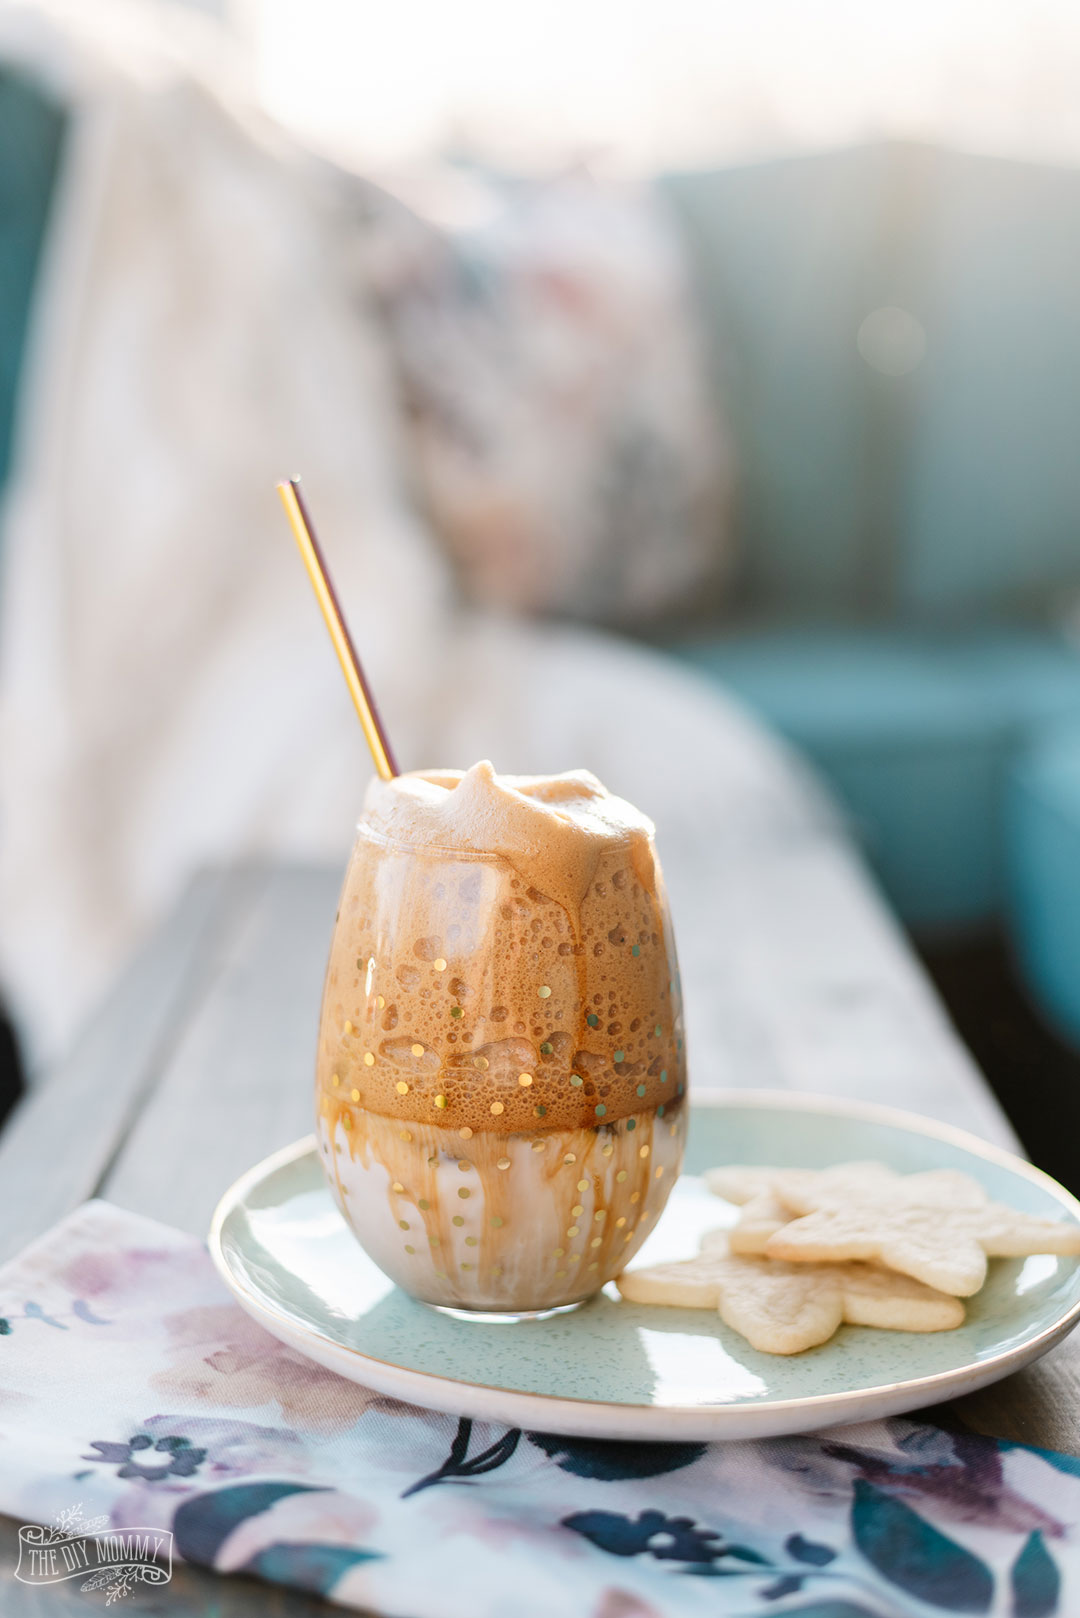 Make DIY Whipped Coffee with real espresso (+ a sugar free option!)